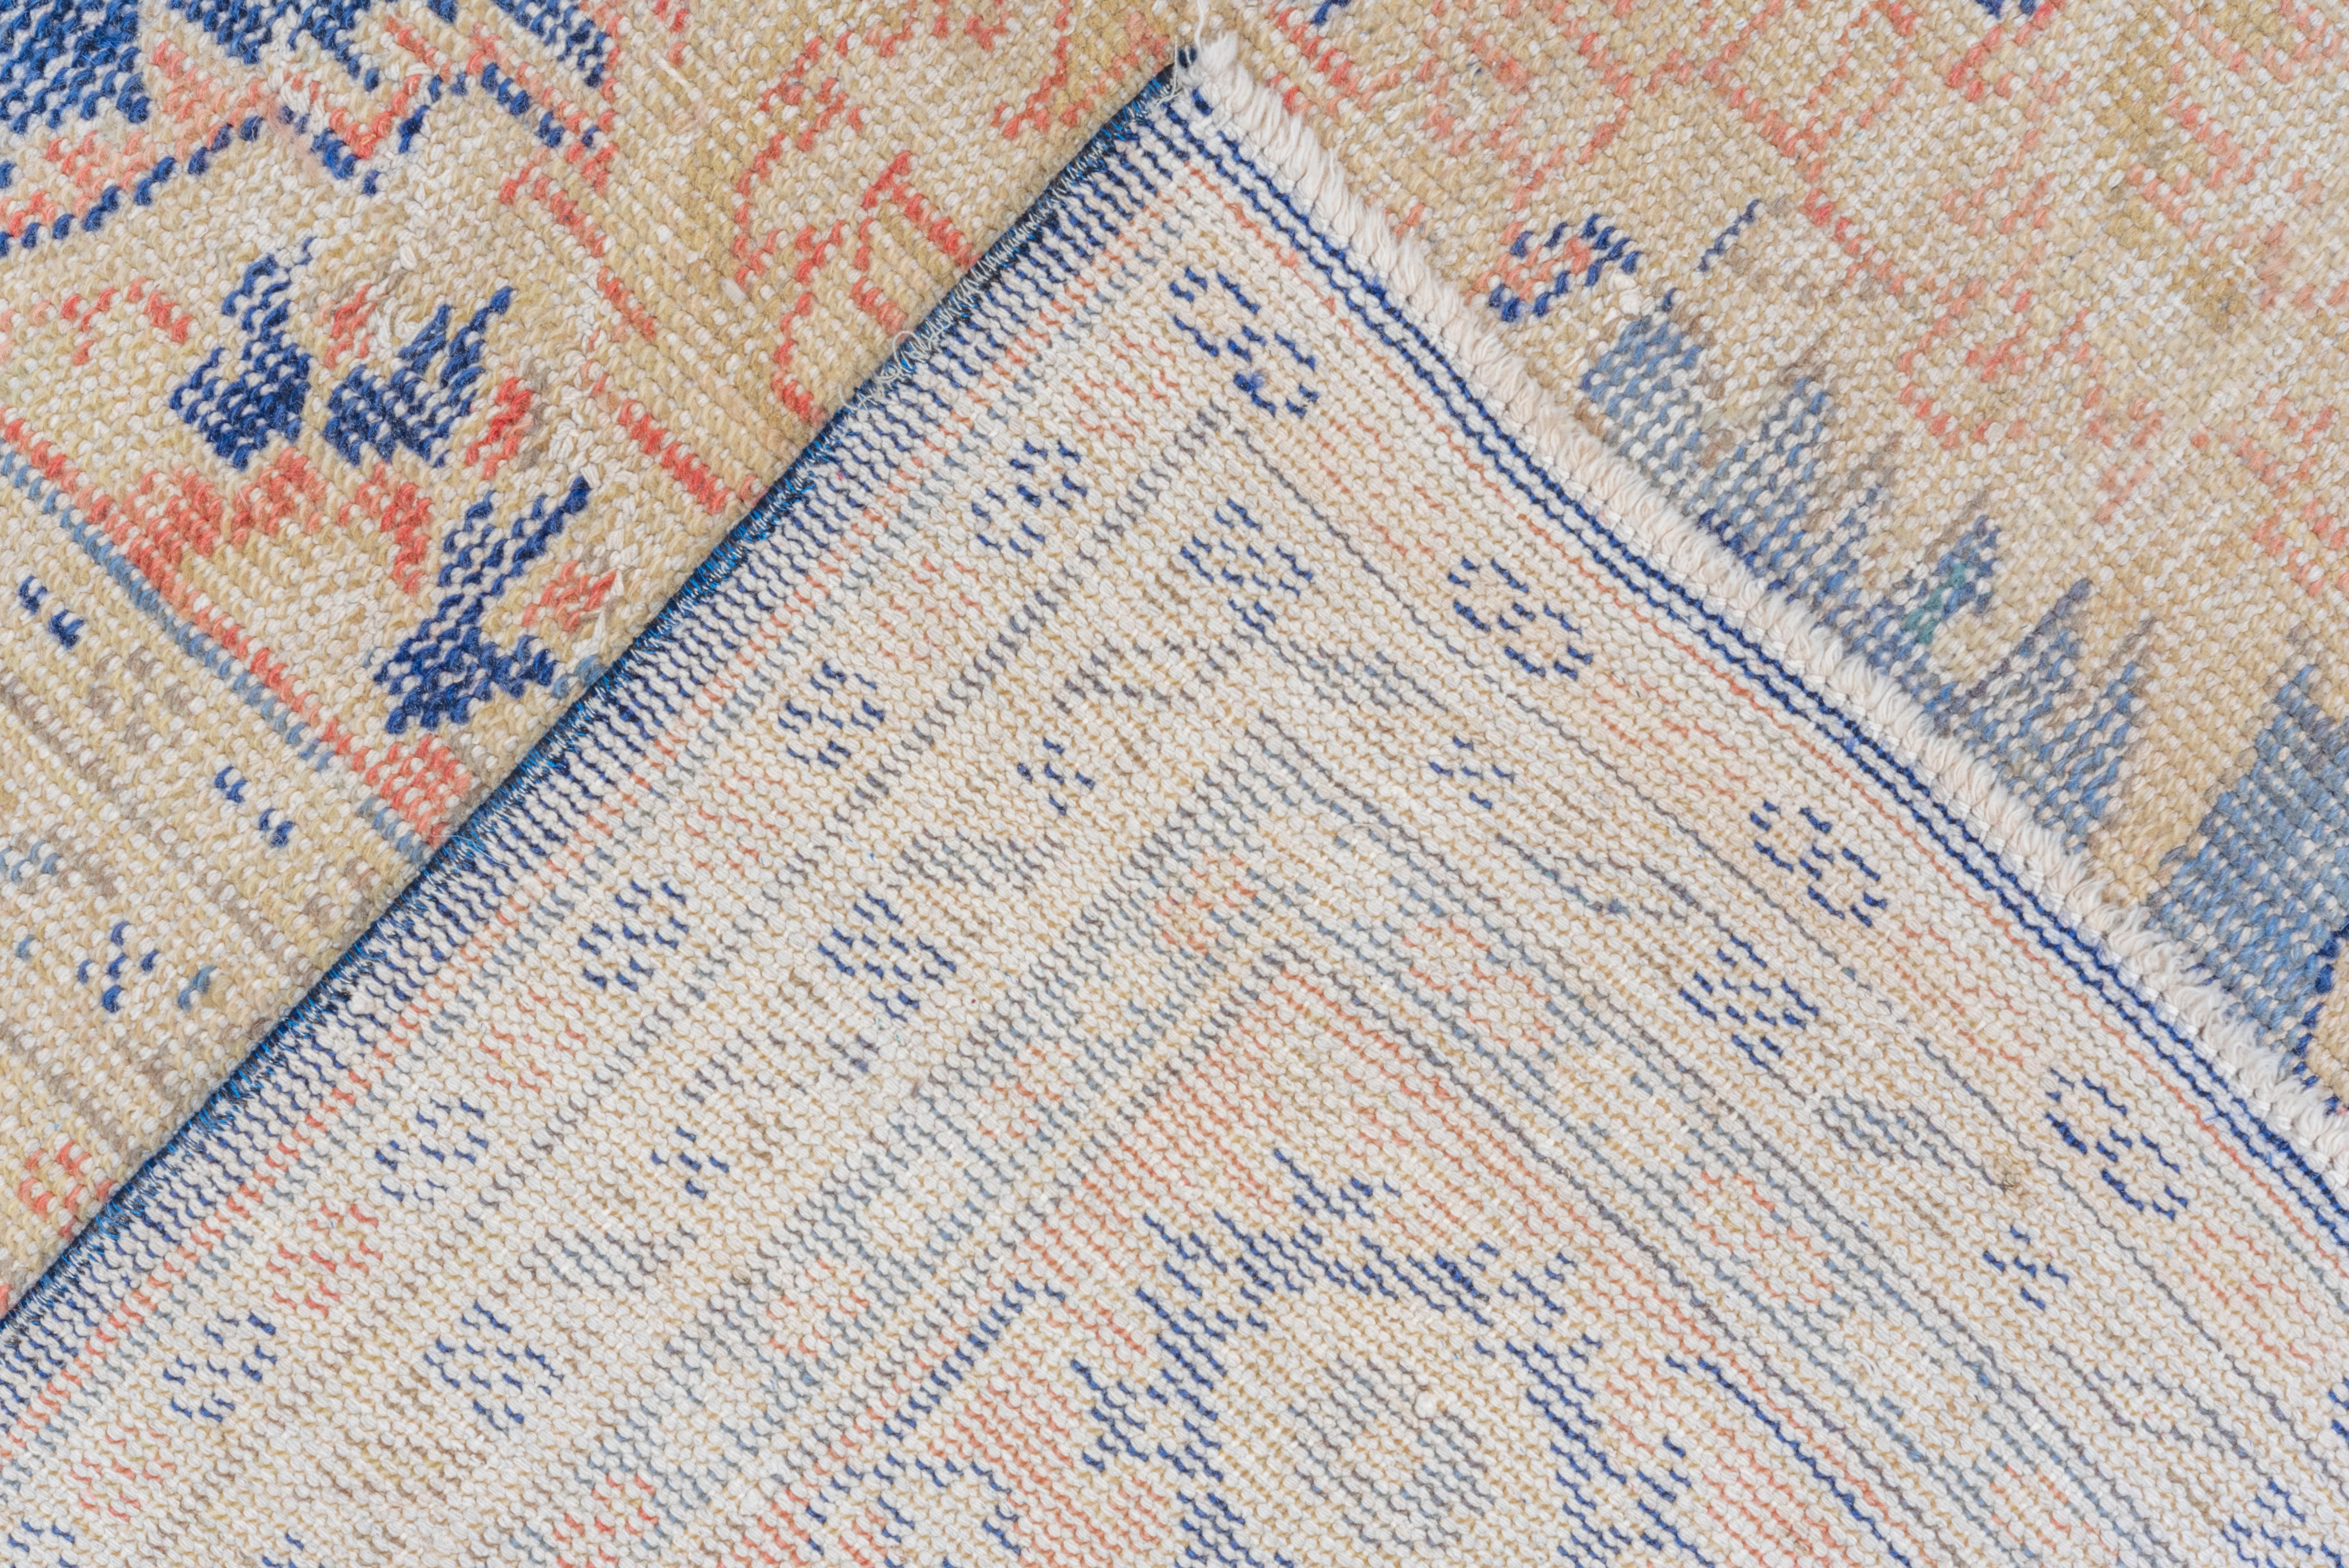 Eliko Rugs by David Ariel Shabby Chic Oushak Rug, Royal Blue Field In Good Condition For Sale In New York, NY